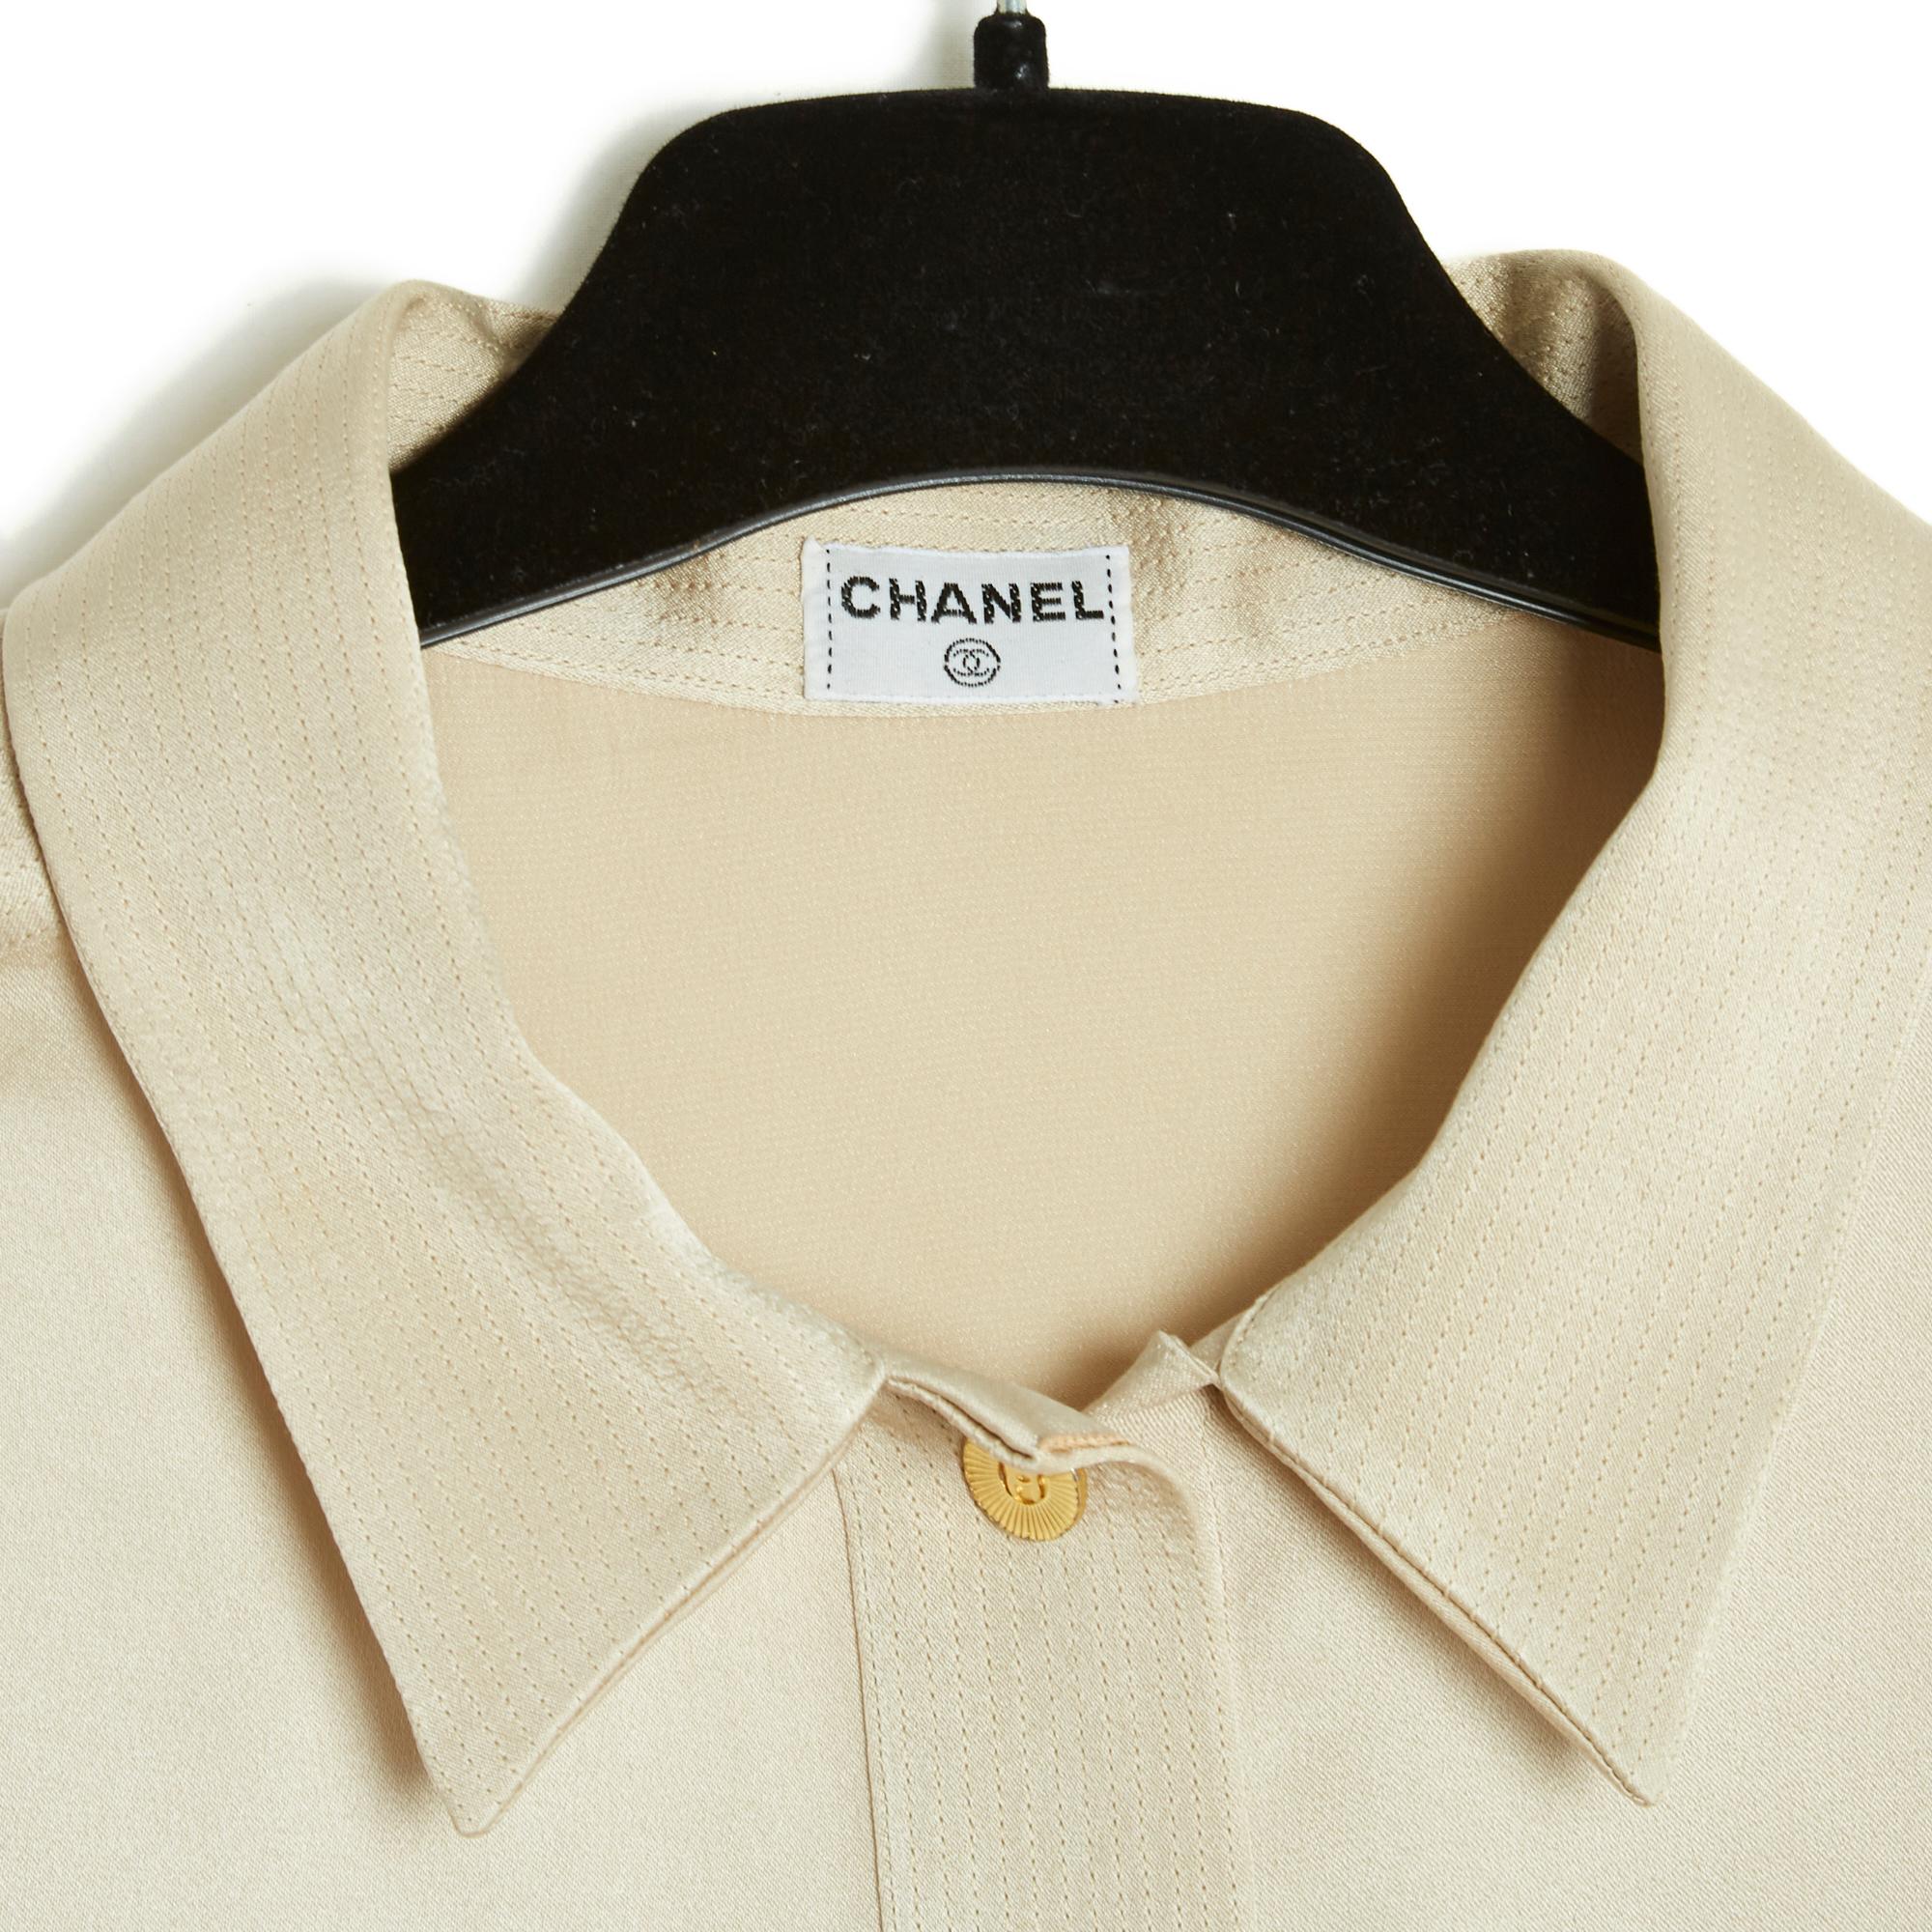 SS95 Chanel Top Blouse Champagne silk FR38 2